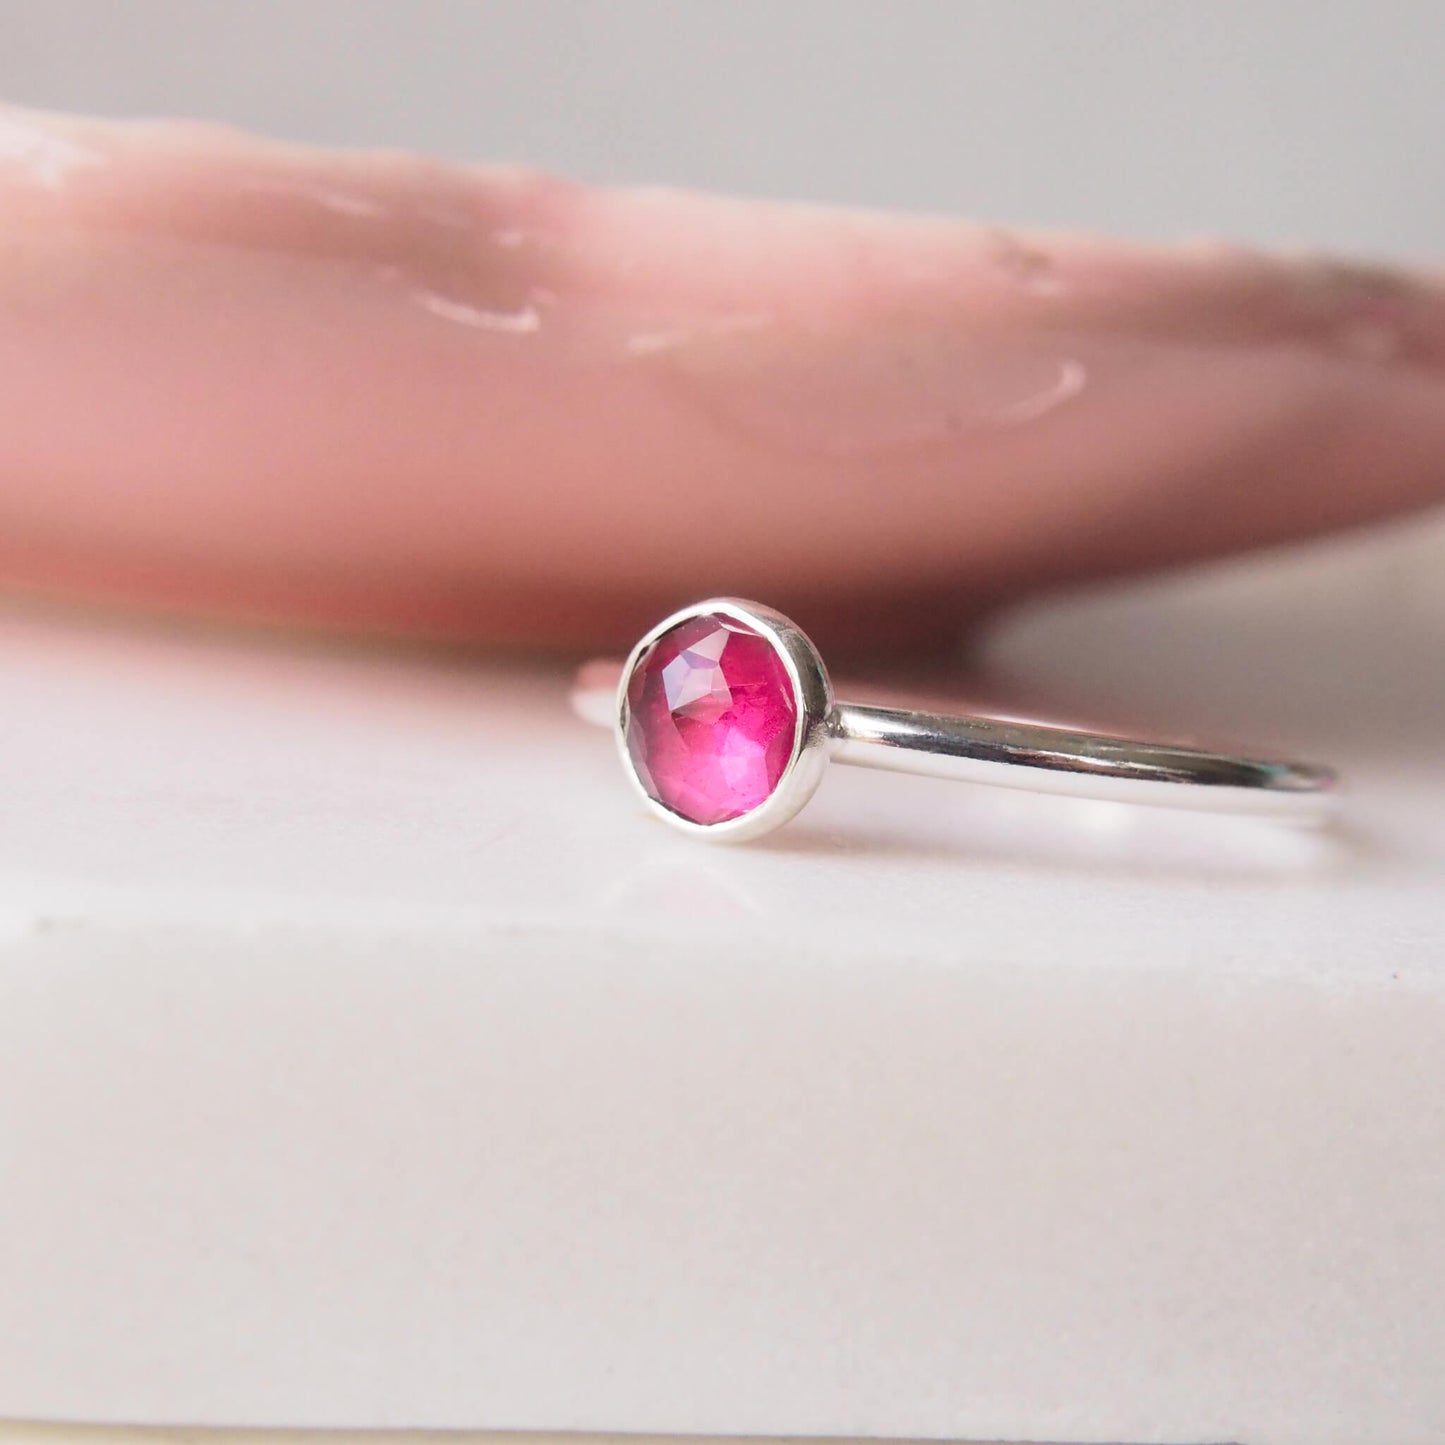 Simple raspberry rhodolite garnet solitaire ring with a 5mm round facet cabochon set onto a round halo style band. pictured on a white and pink background. Handmade by maram jewellery in Edinburgh UK